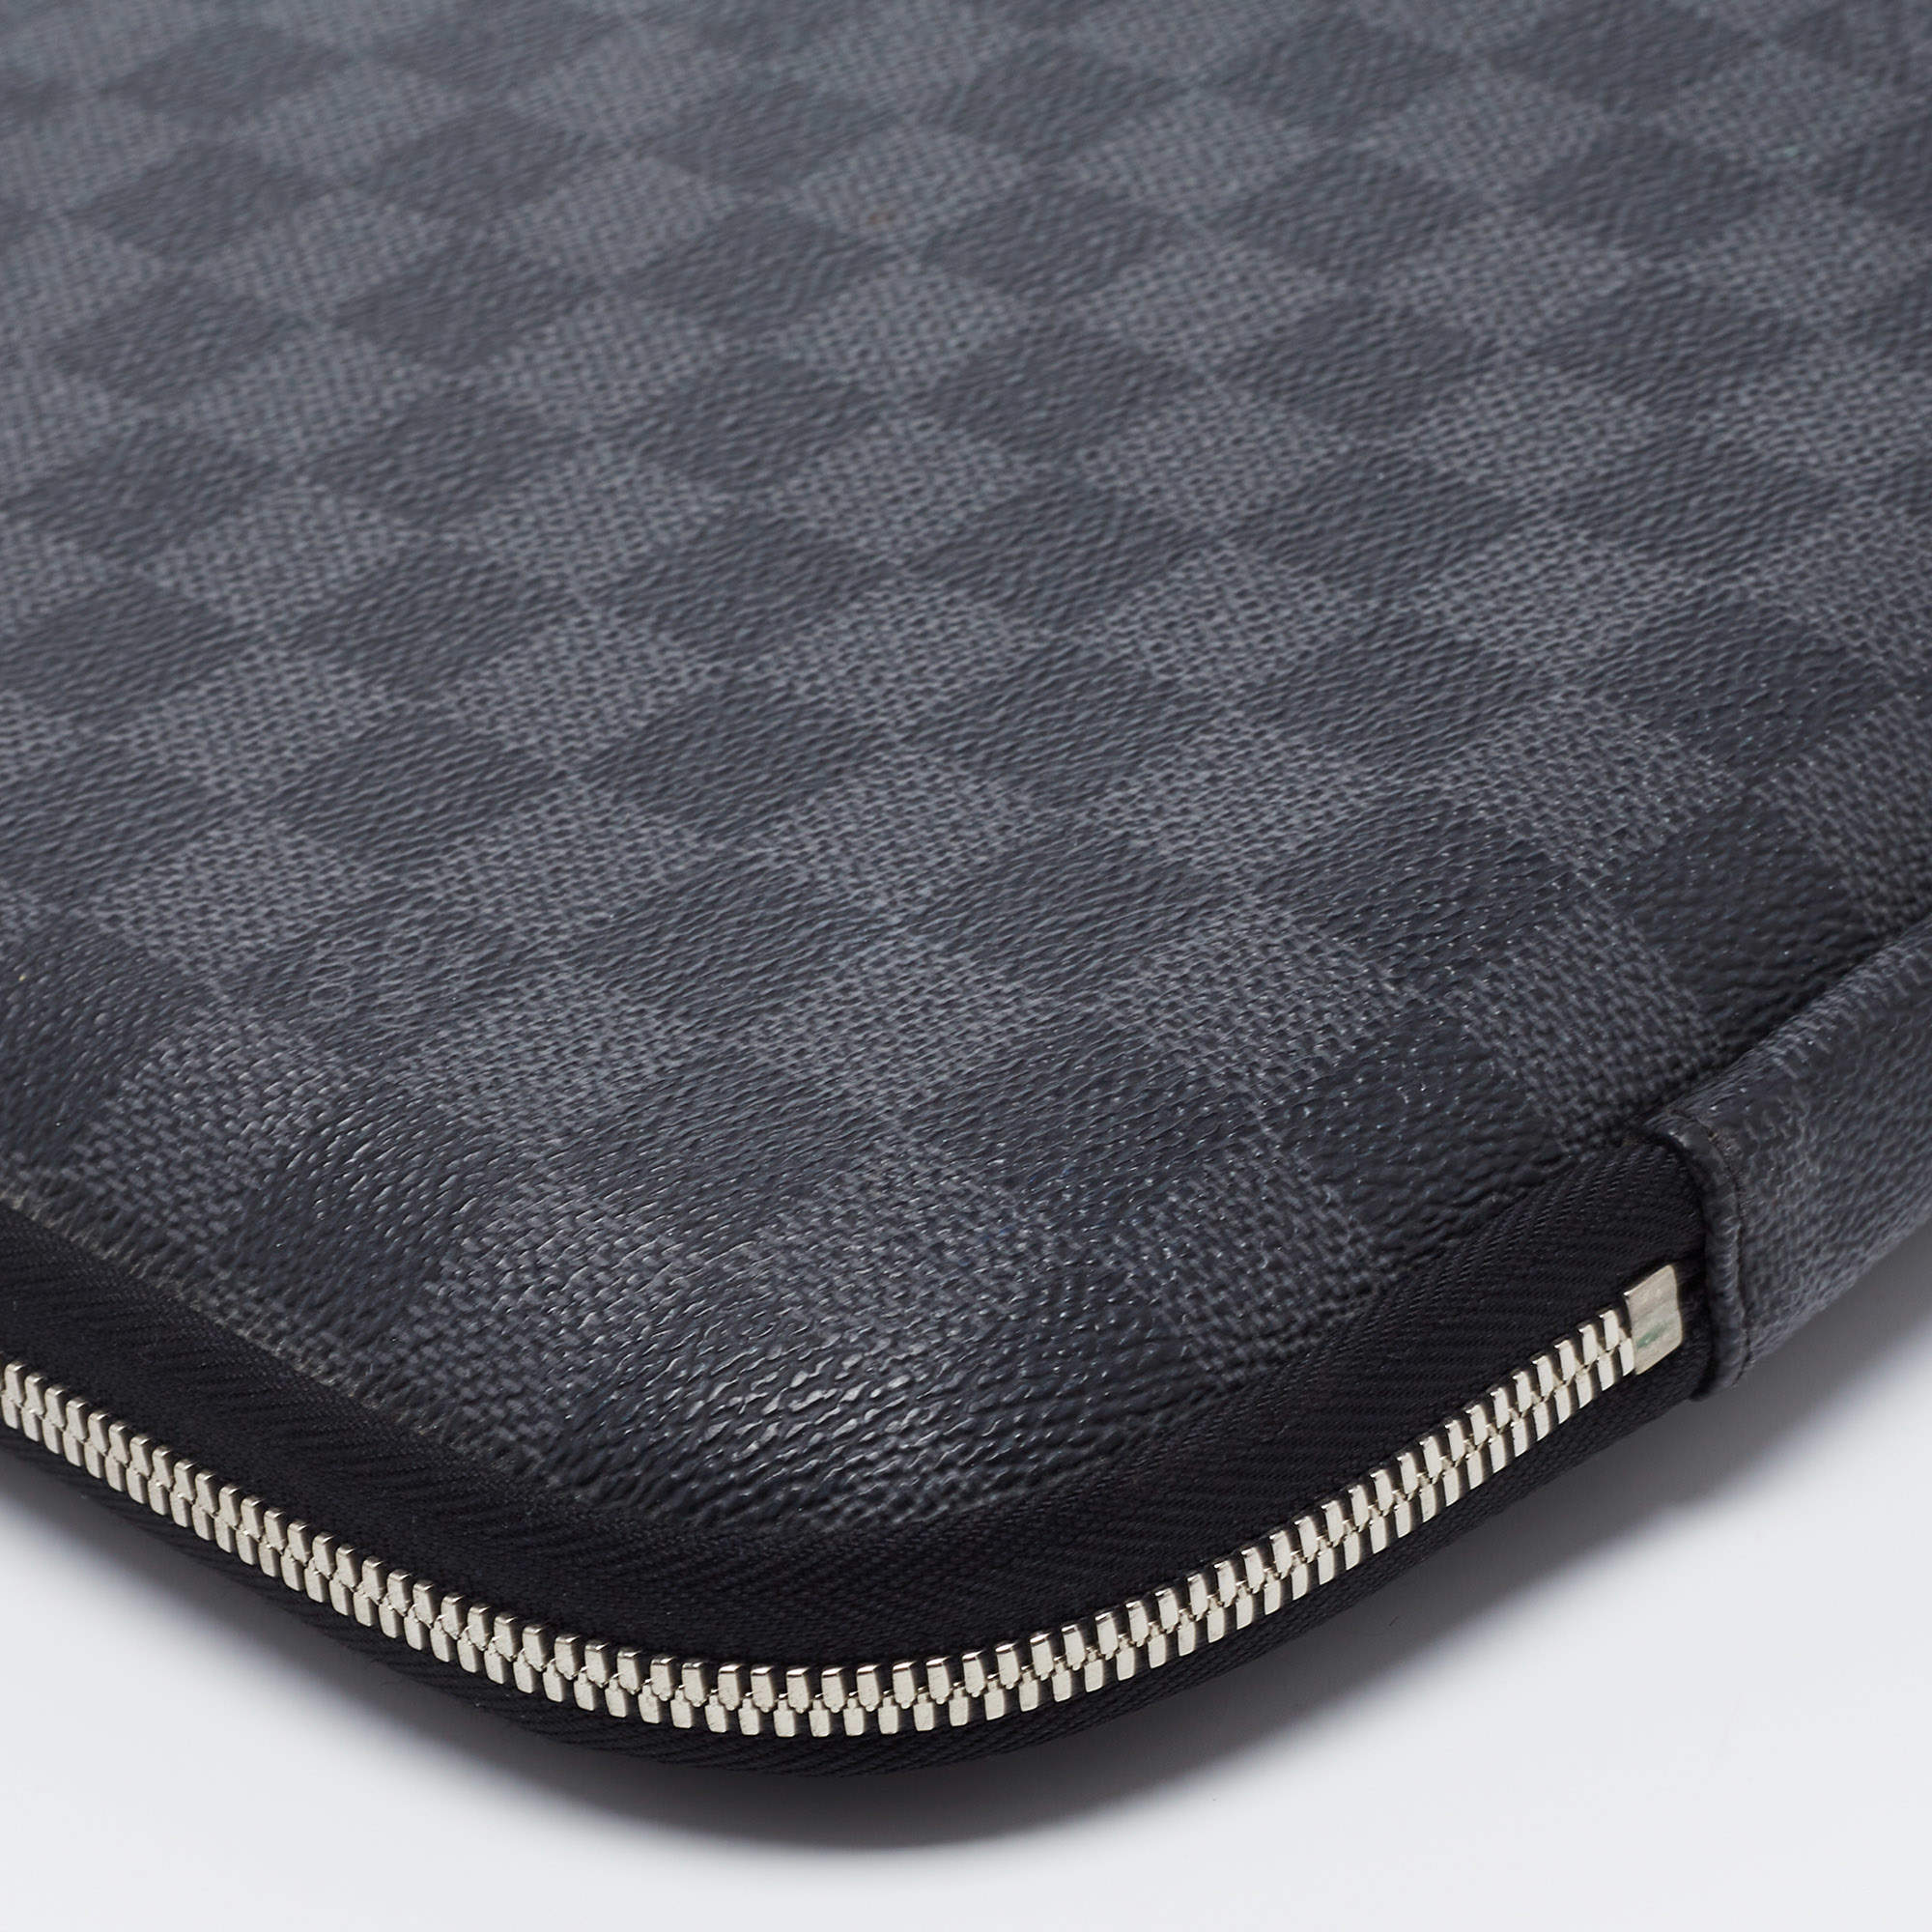 Louis Vuitton Computer Sleeves exude class and luxury - Luxurylaunches